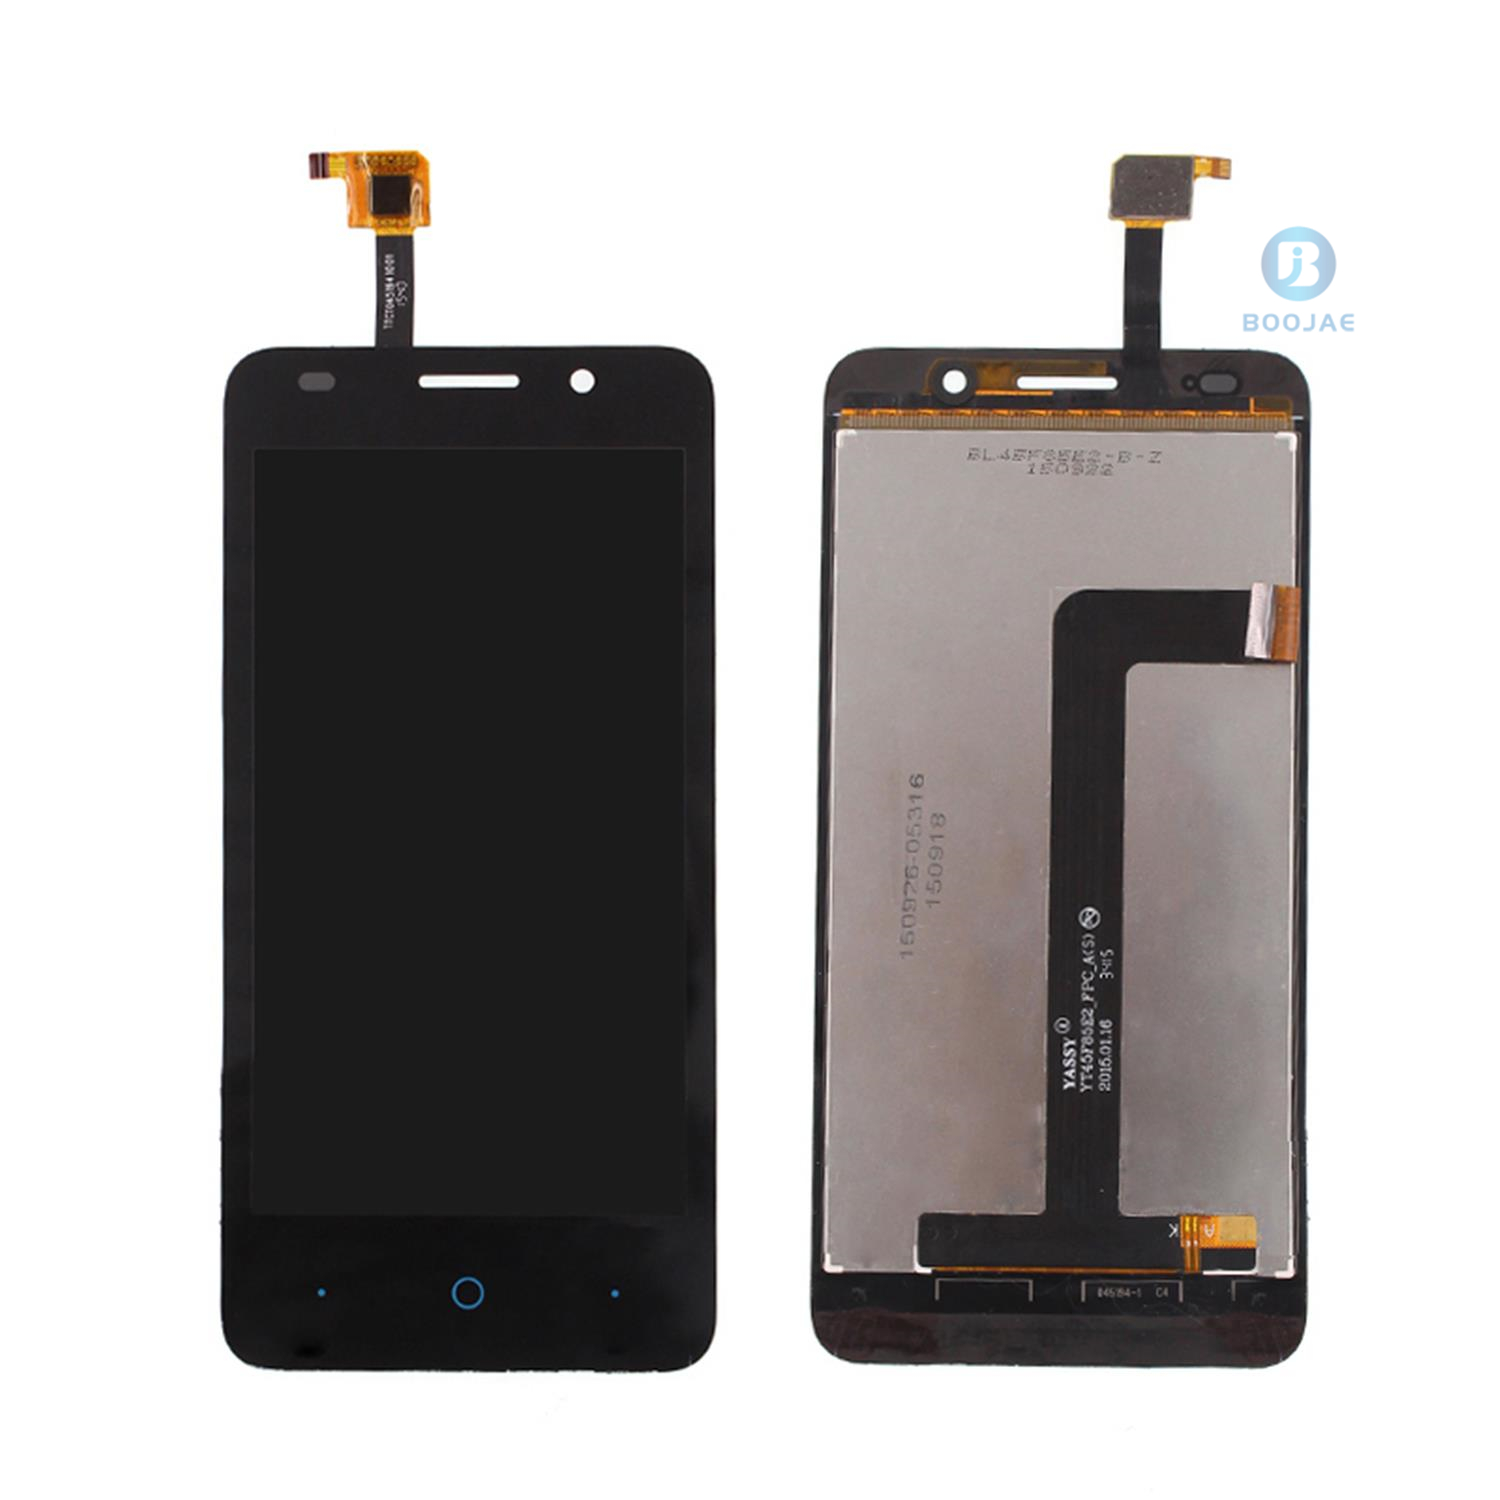 ZTE Z820 LCD Screen Display, Lcd Assembly Replacement